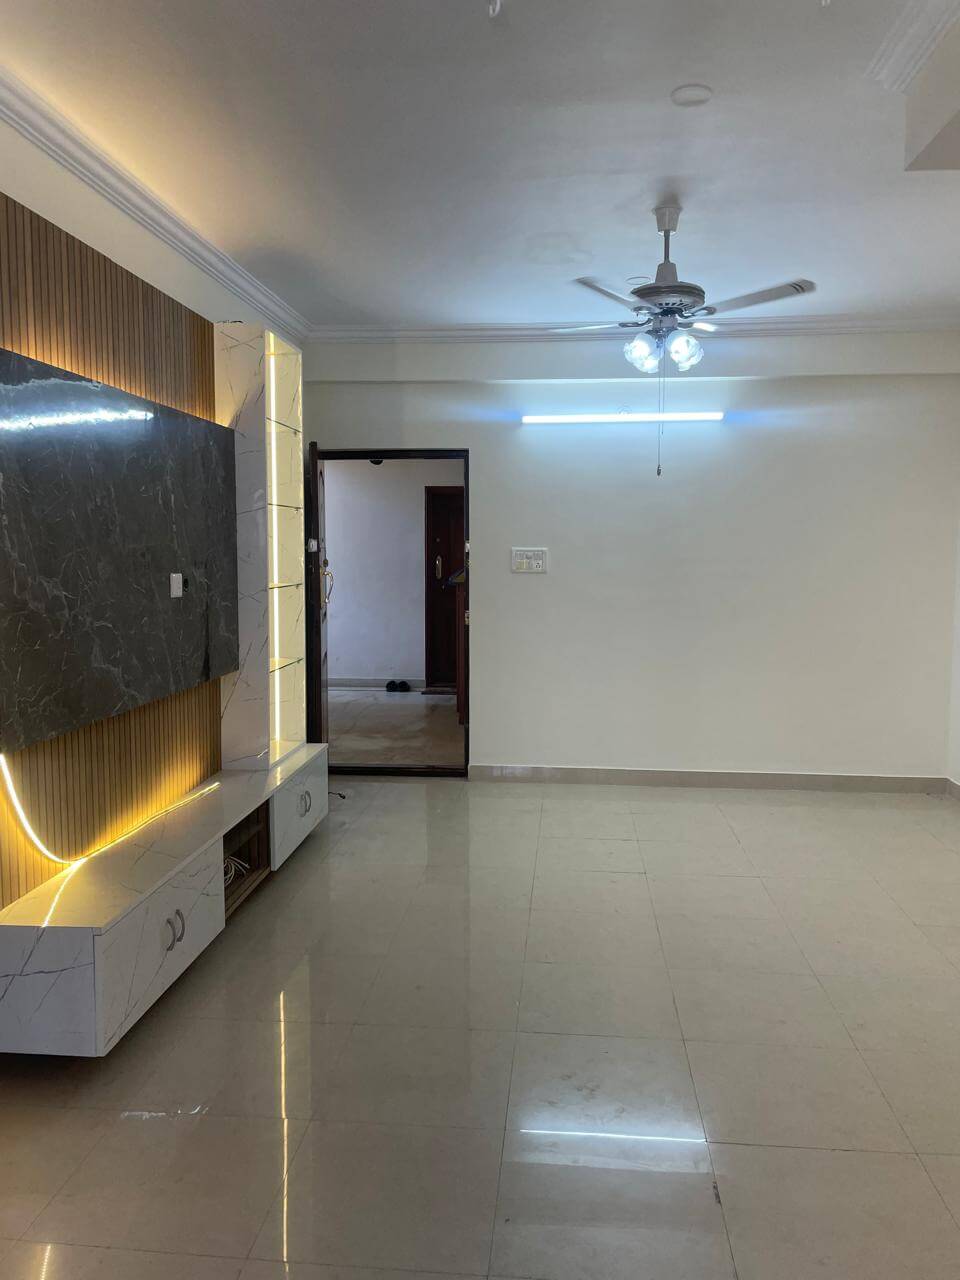 3 BHK Apartment / Flat for Sale 1356 Sq. Feet at Bangalore
, Richards Town